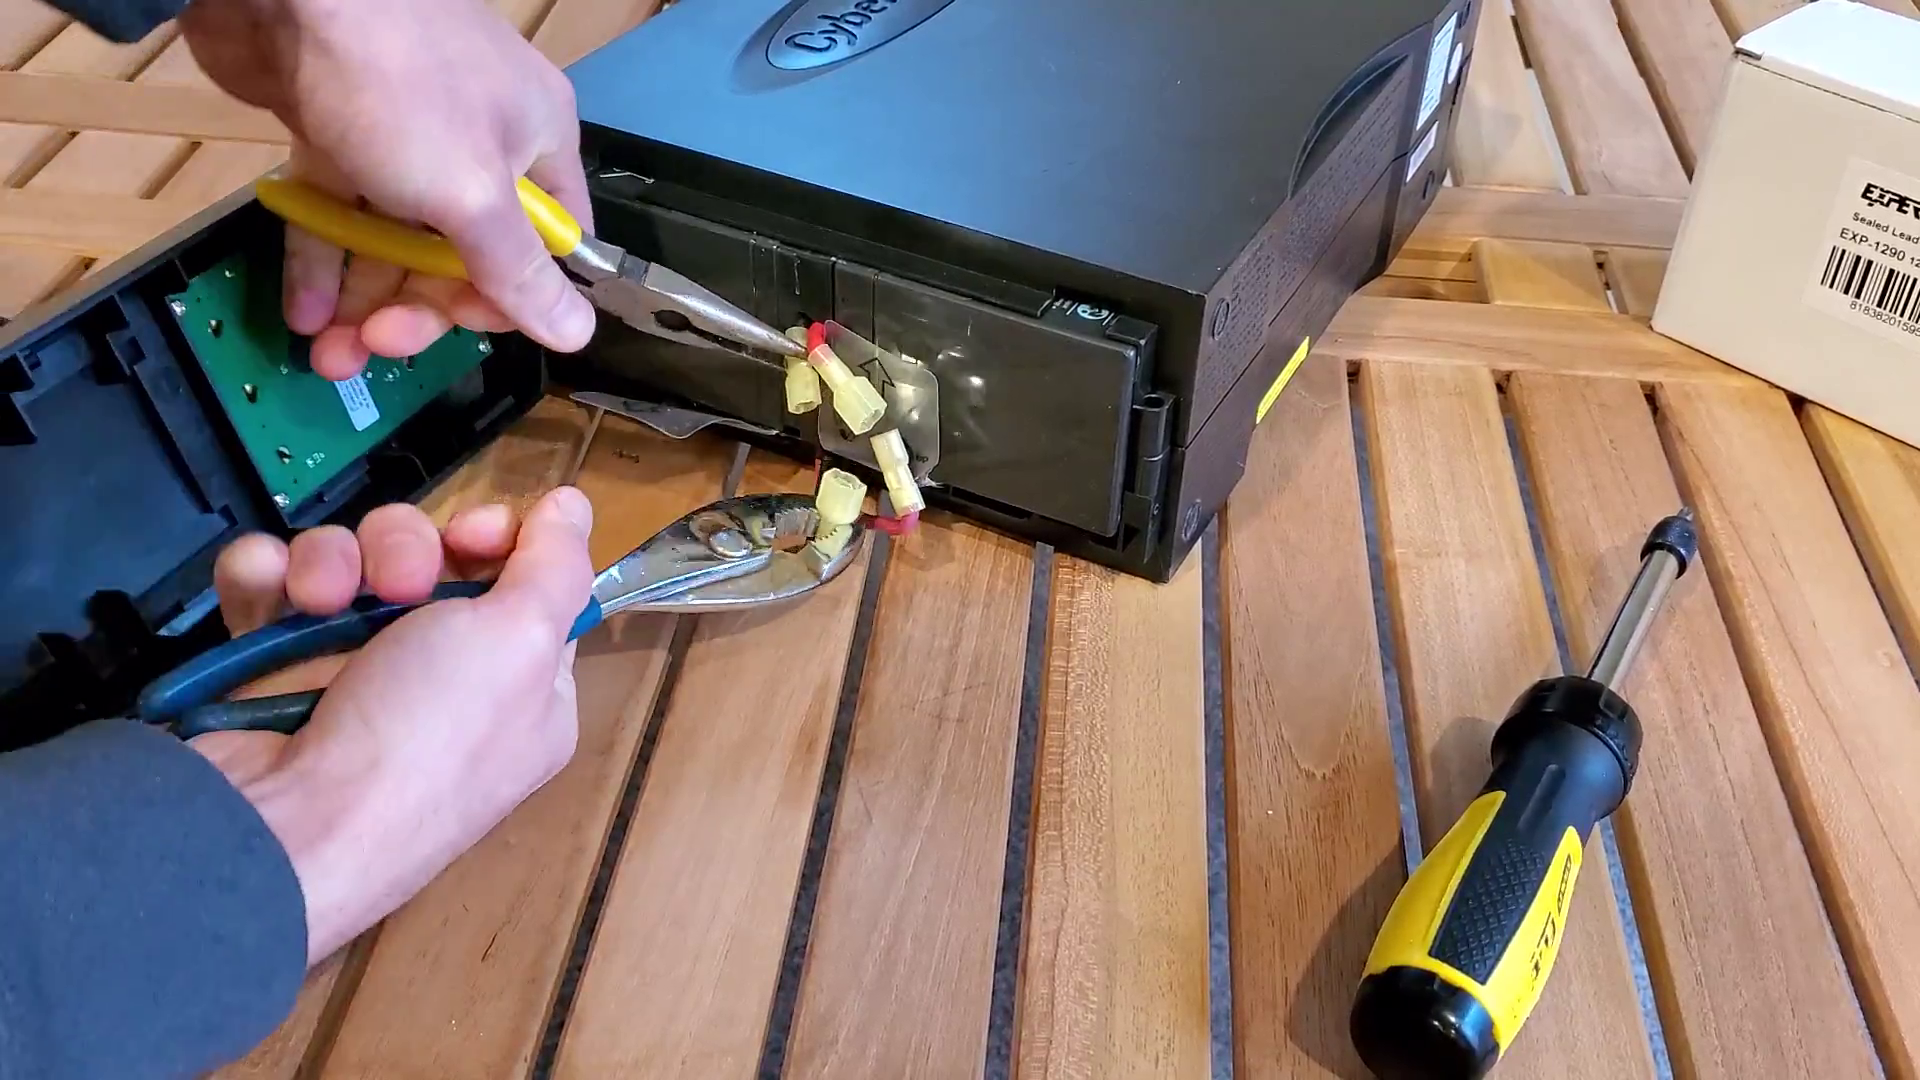 unplugging the battery cables, part of the How to Replace a CyberPower 1500AV UPS Battery article